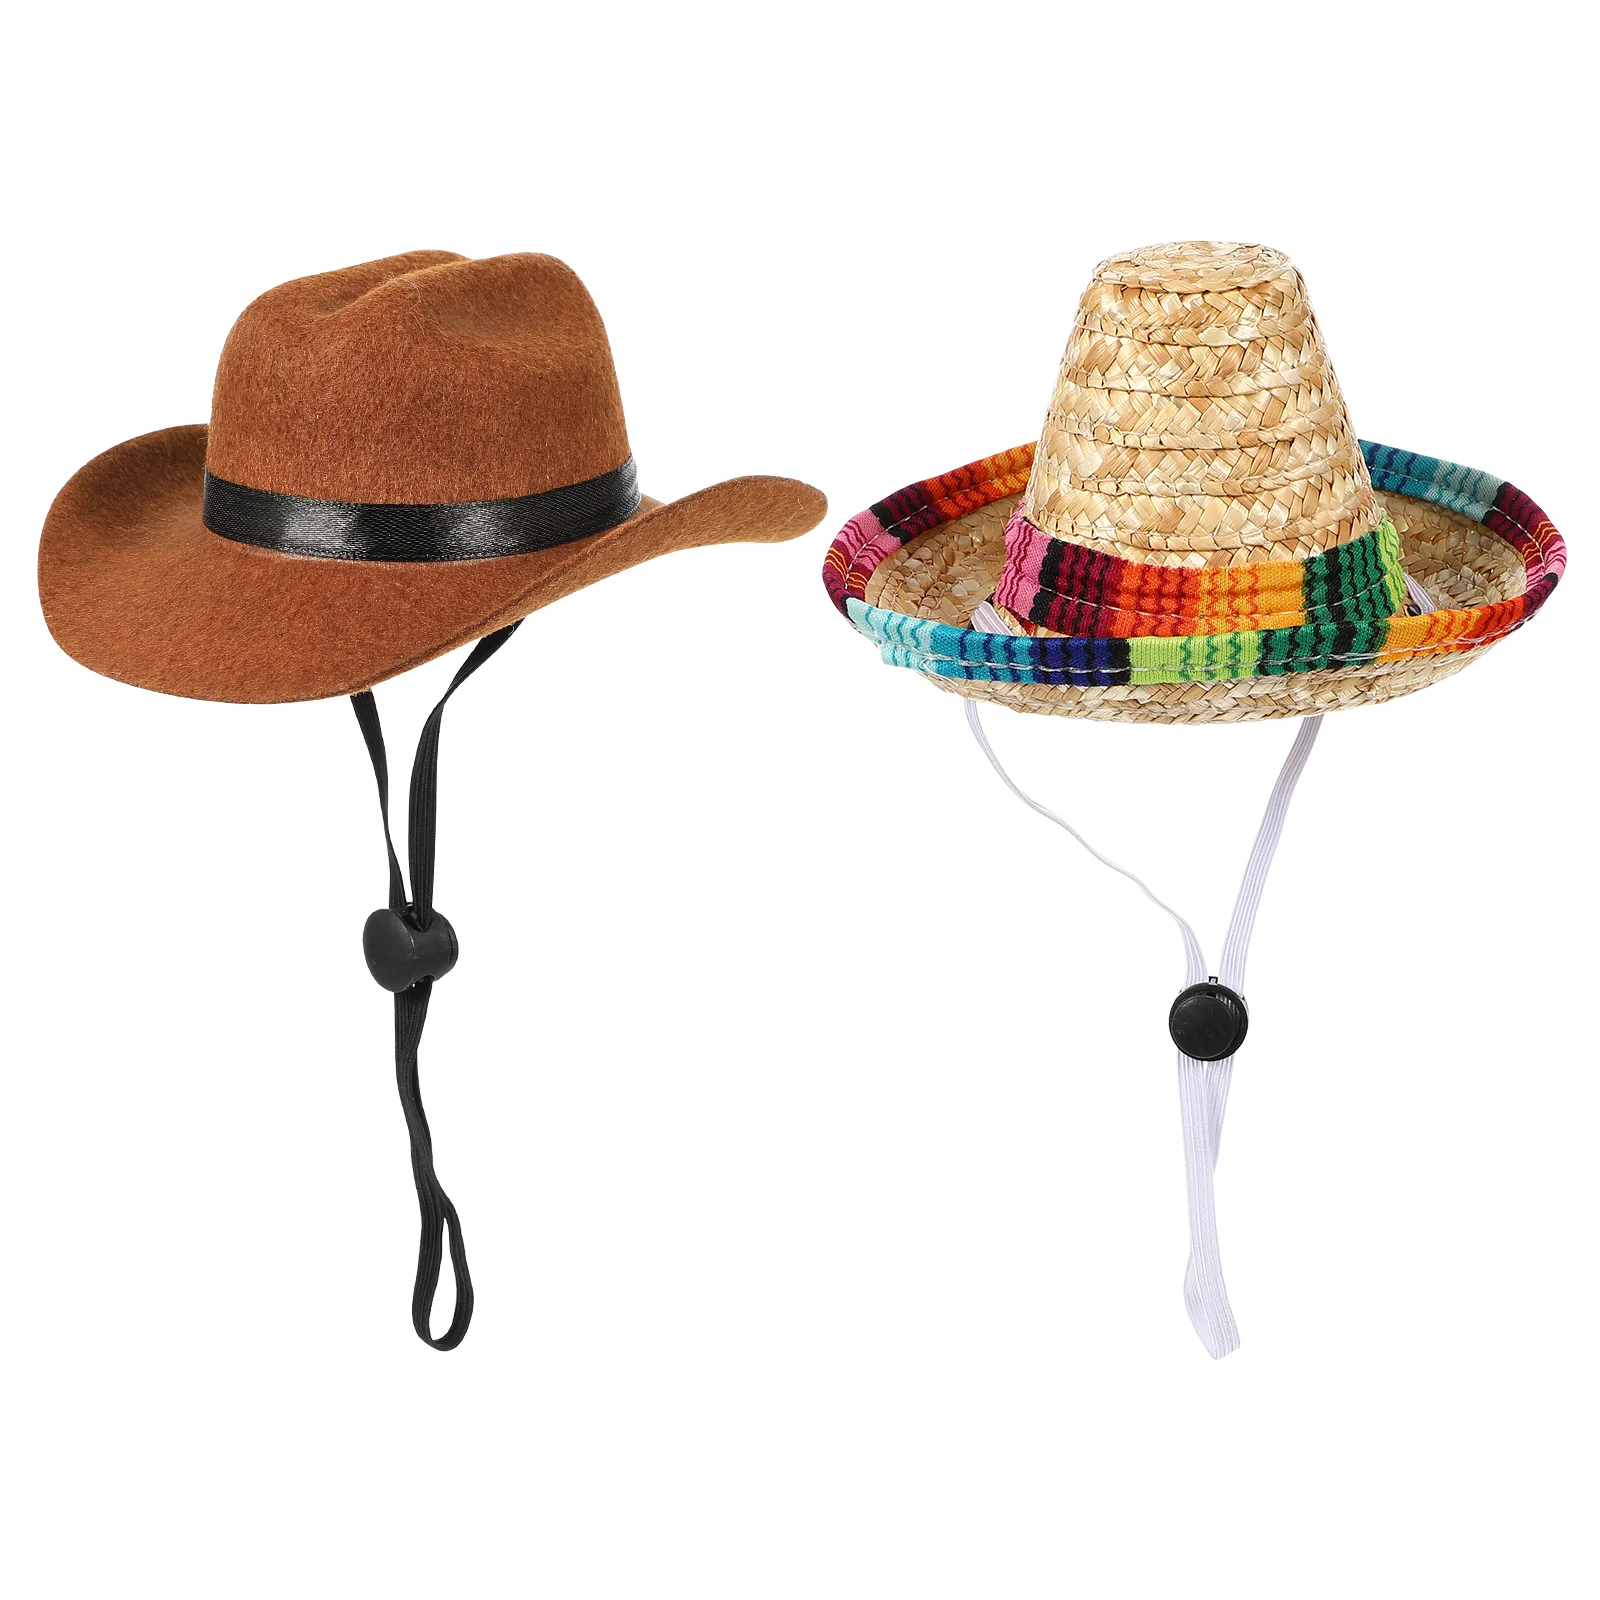 2pcs Pet Cowboy Hats Cats Straw Hats Dogs Headwear Photo Props Party Hats Cosplay for Cats Dogs